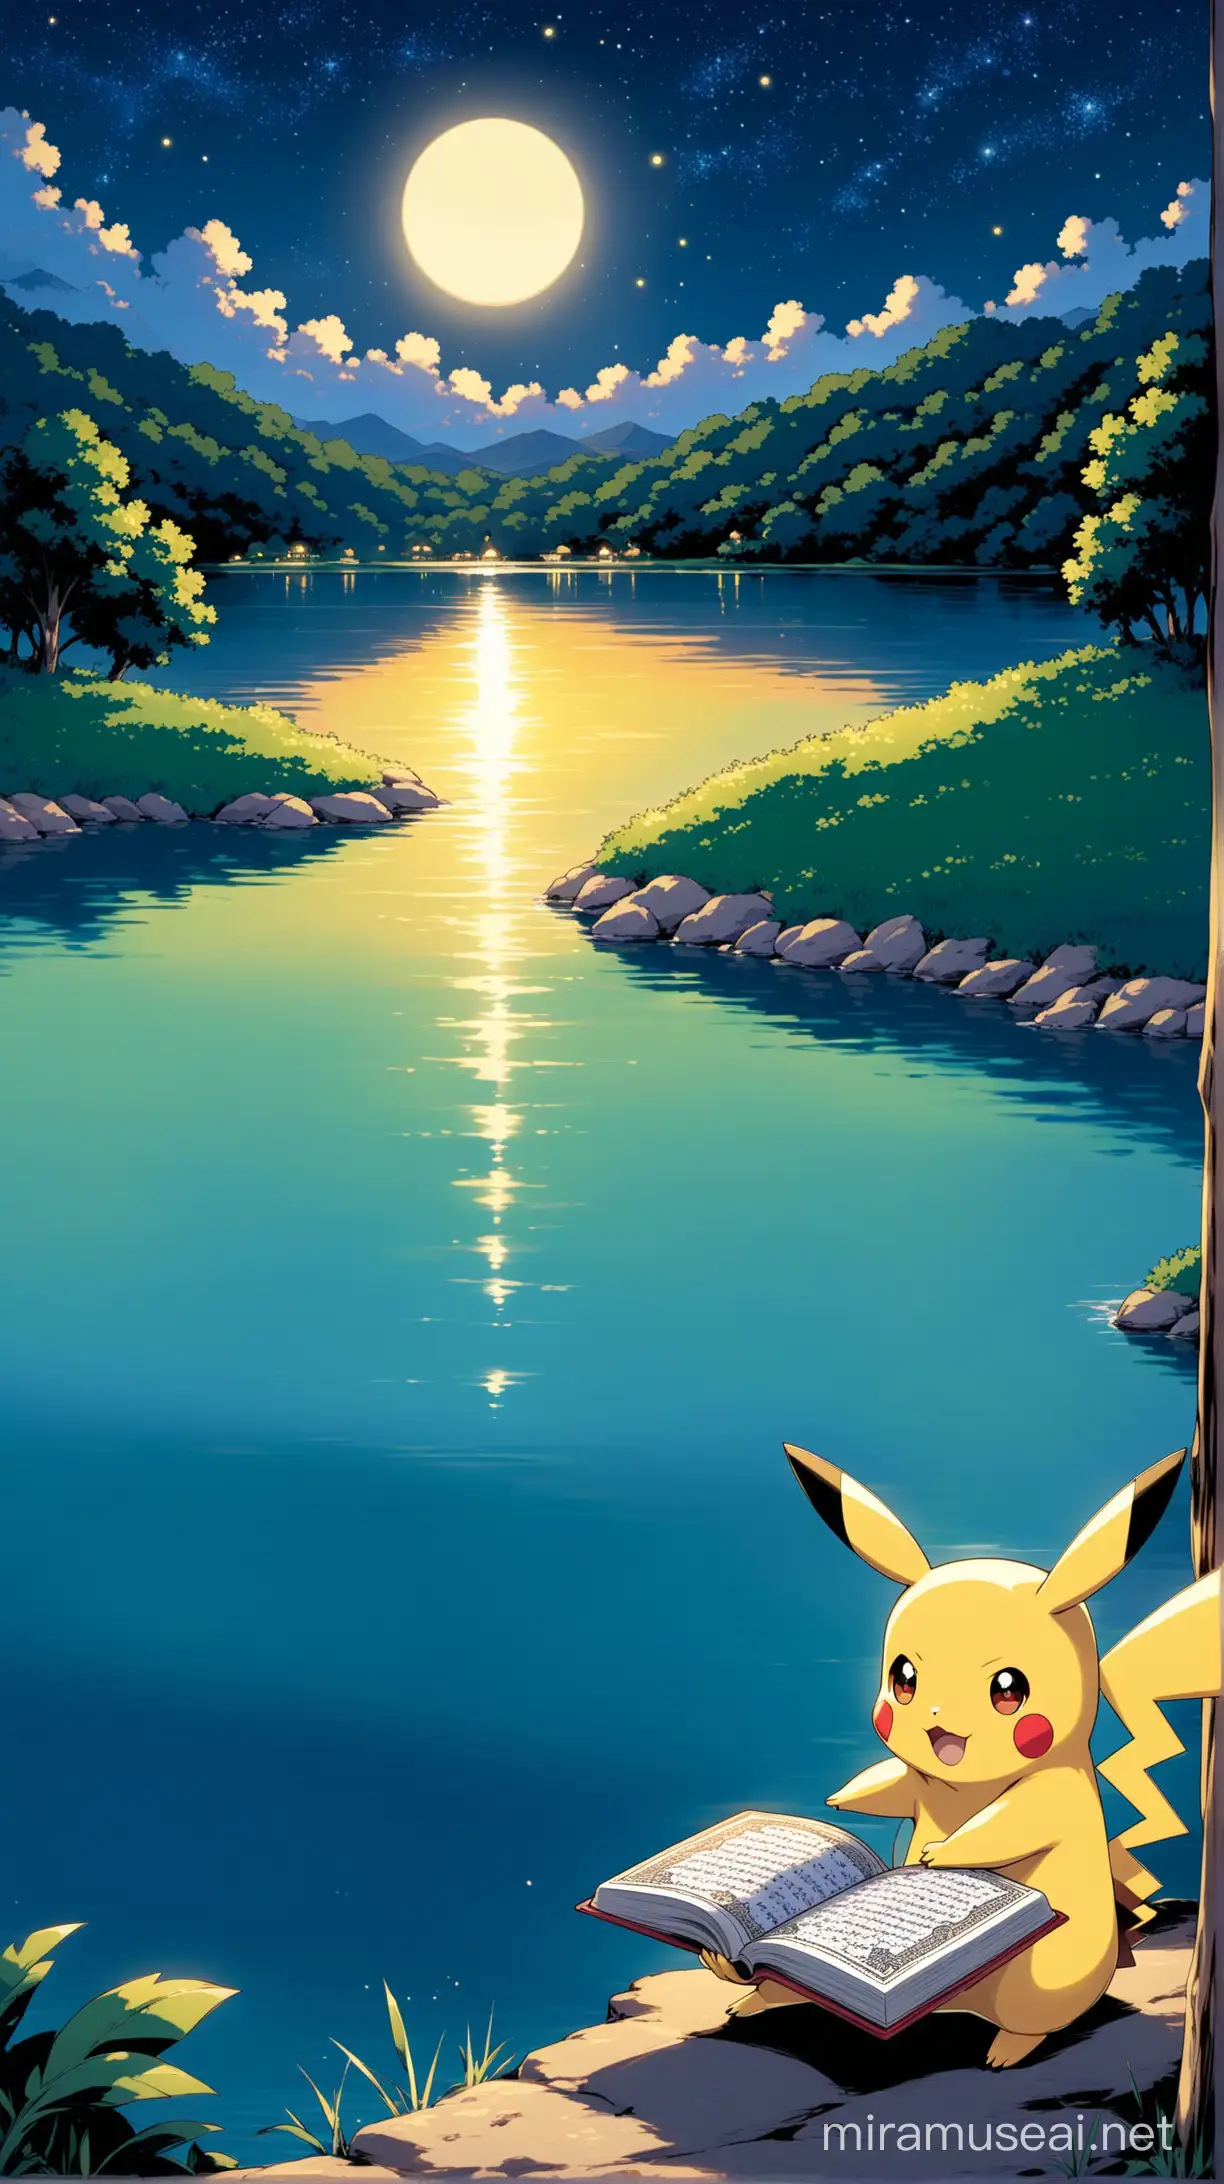 
Pikachu reads the Quran next to a lake at night